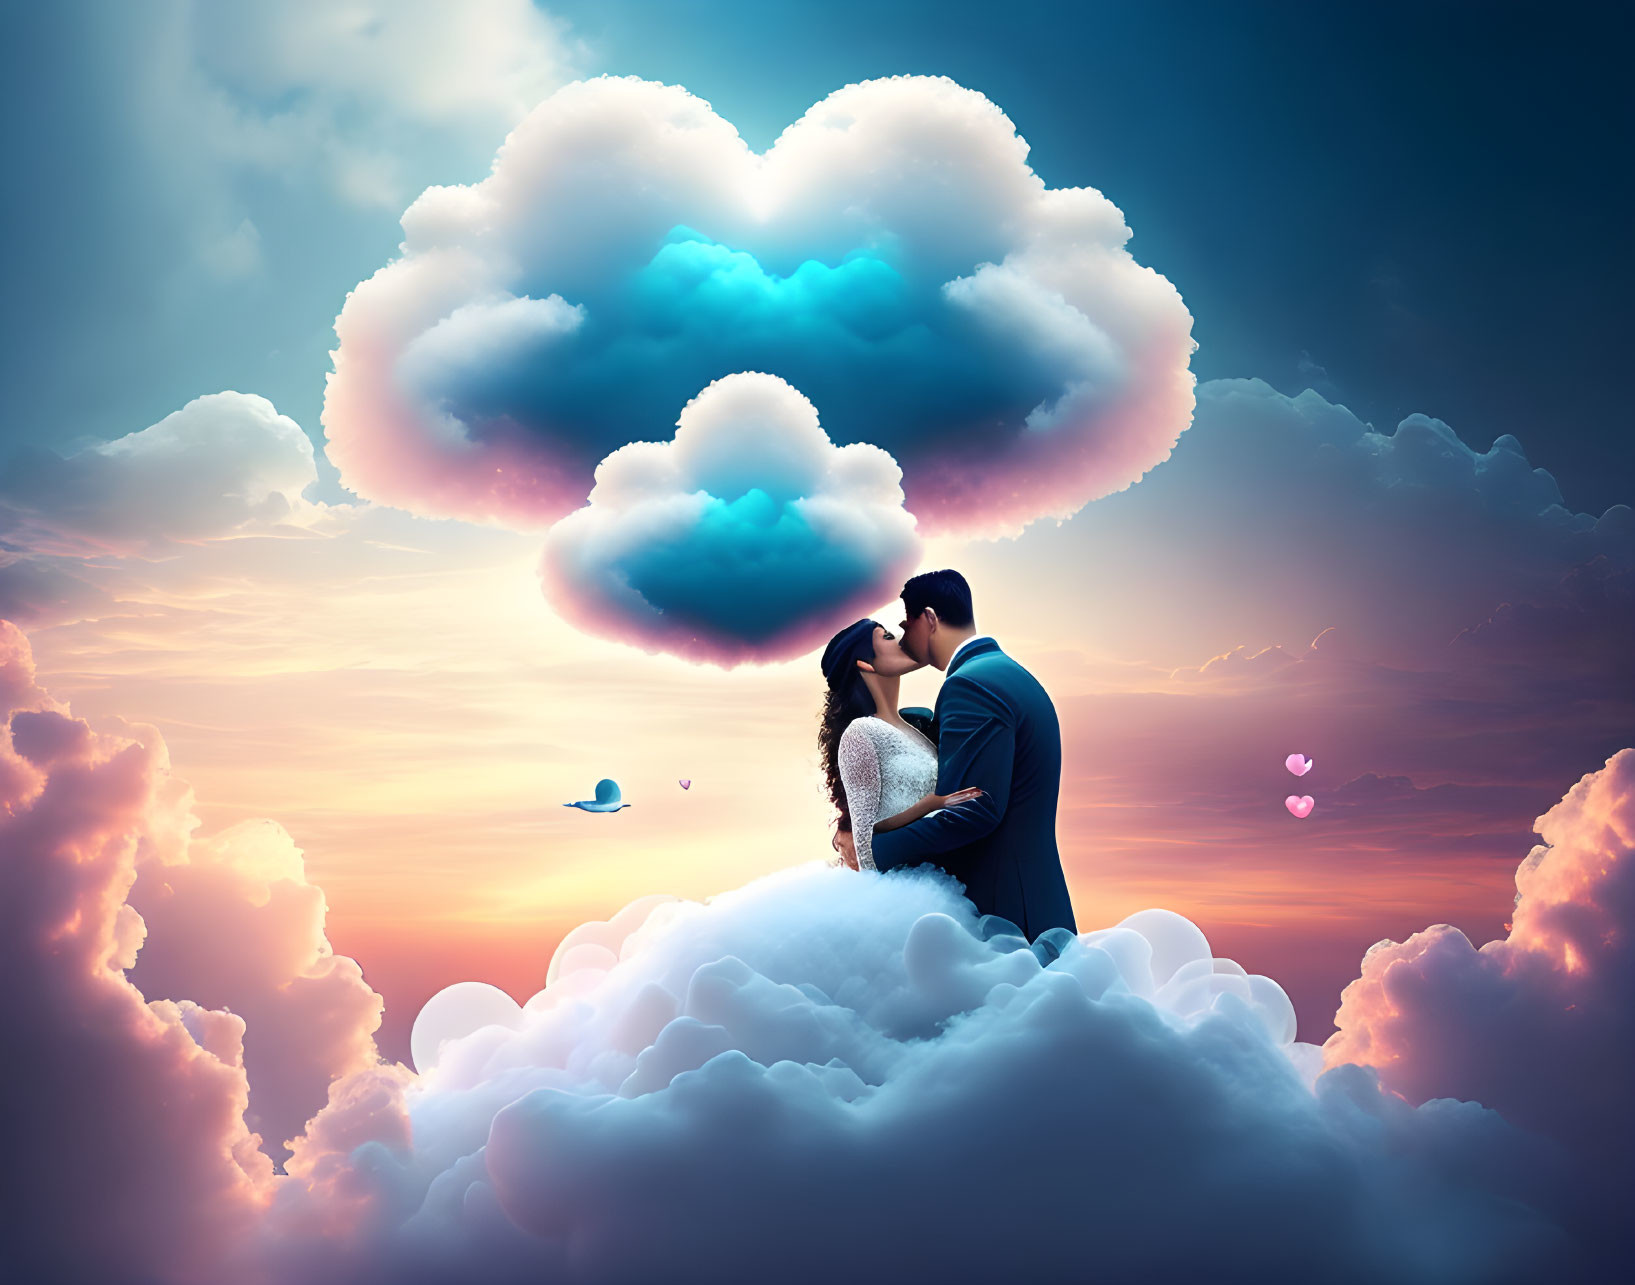 Formal attired couple kissing on heart-shaped cloud in dreamy dusk sky